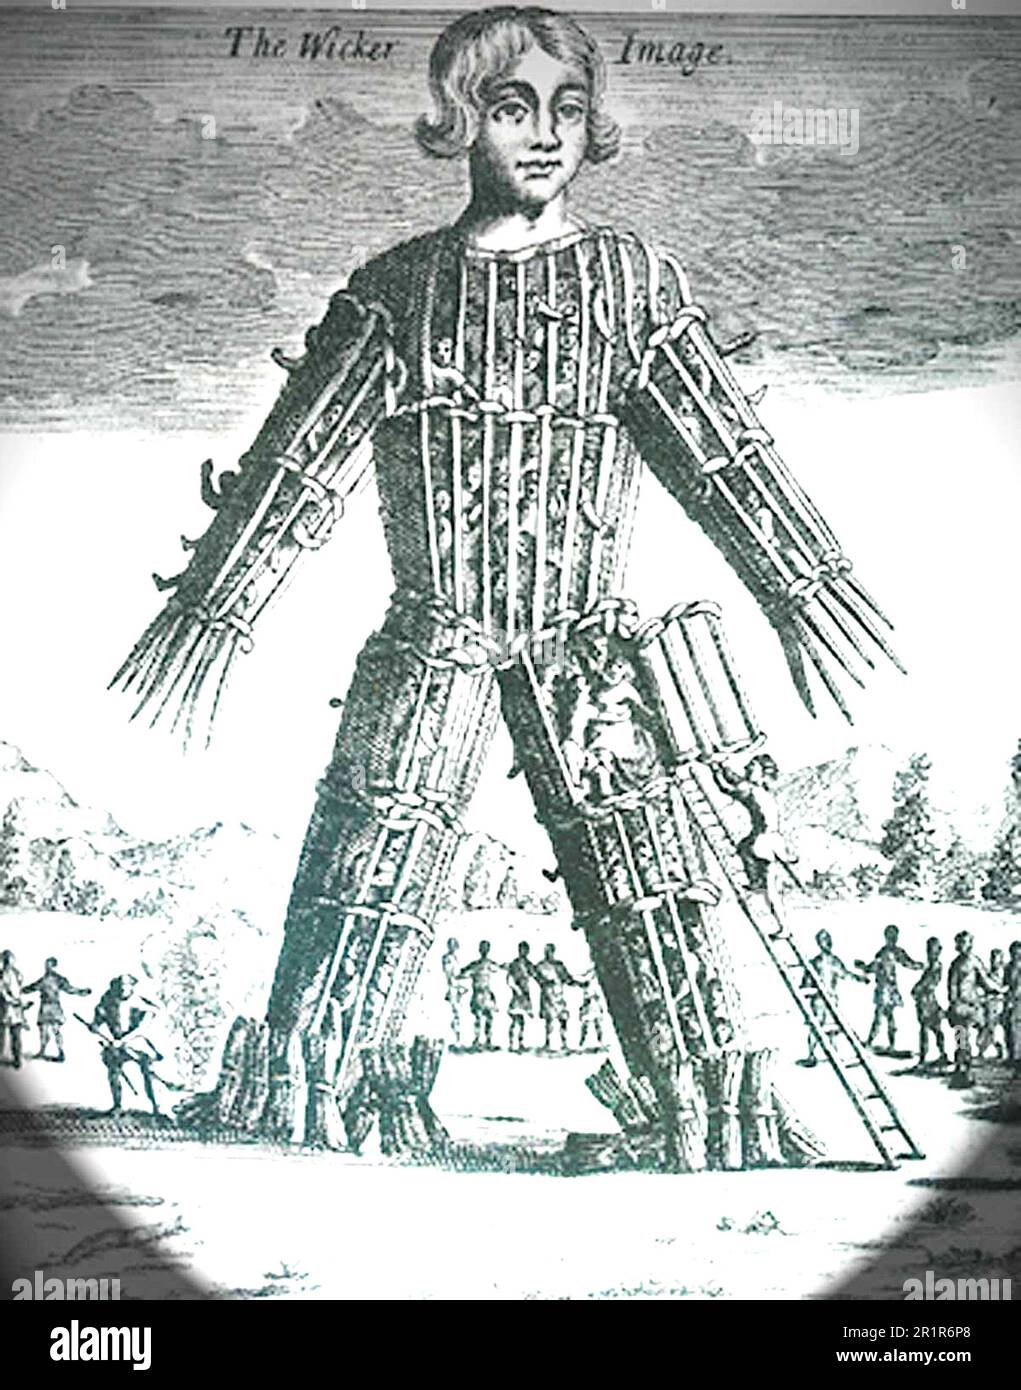 The Wicker Man - Filled with People - Human Sacrifice Stock Photo